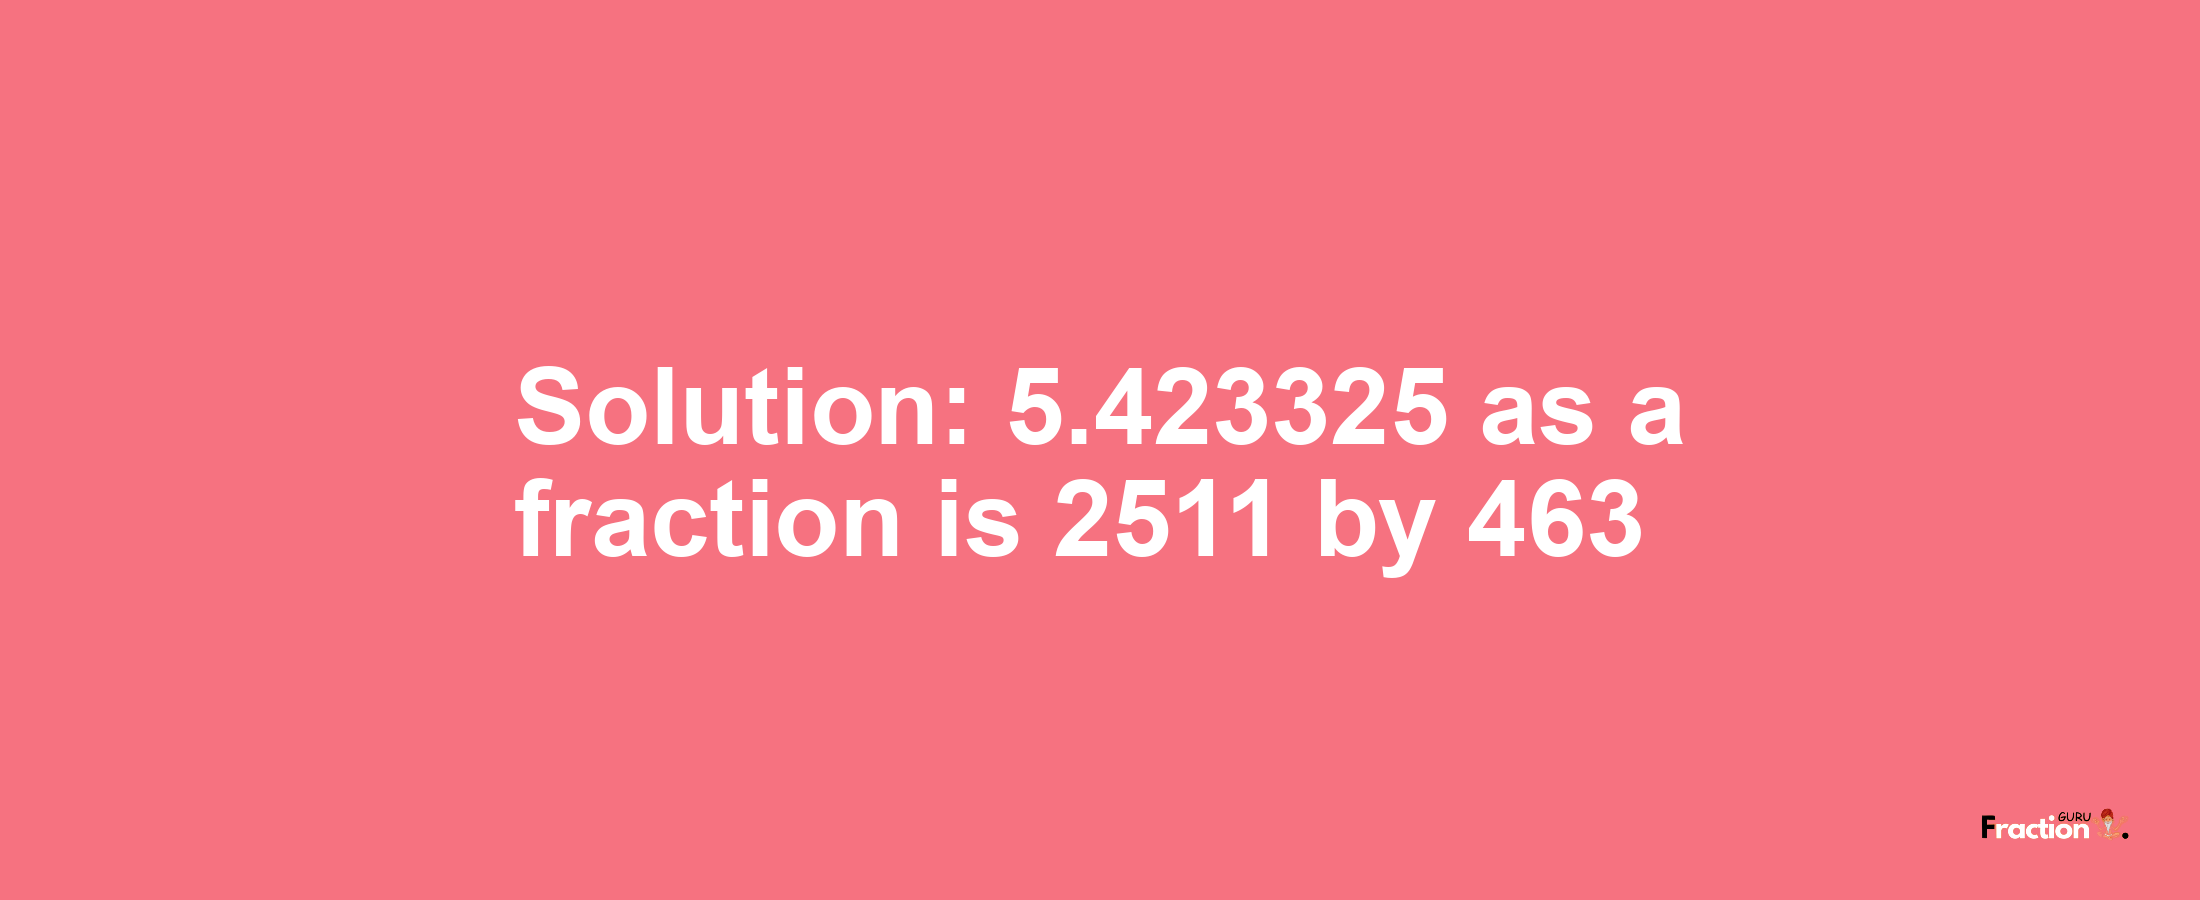 Solution:5.423325 as a fraction is 2511/463